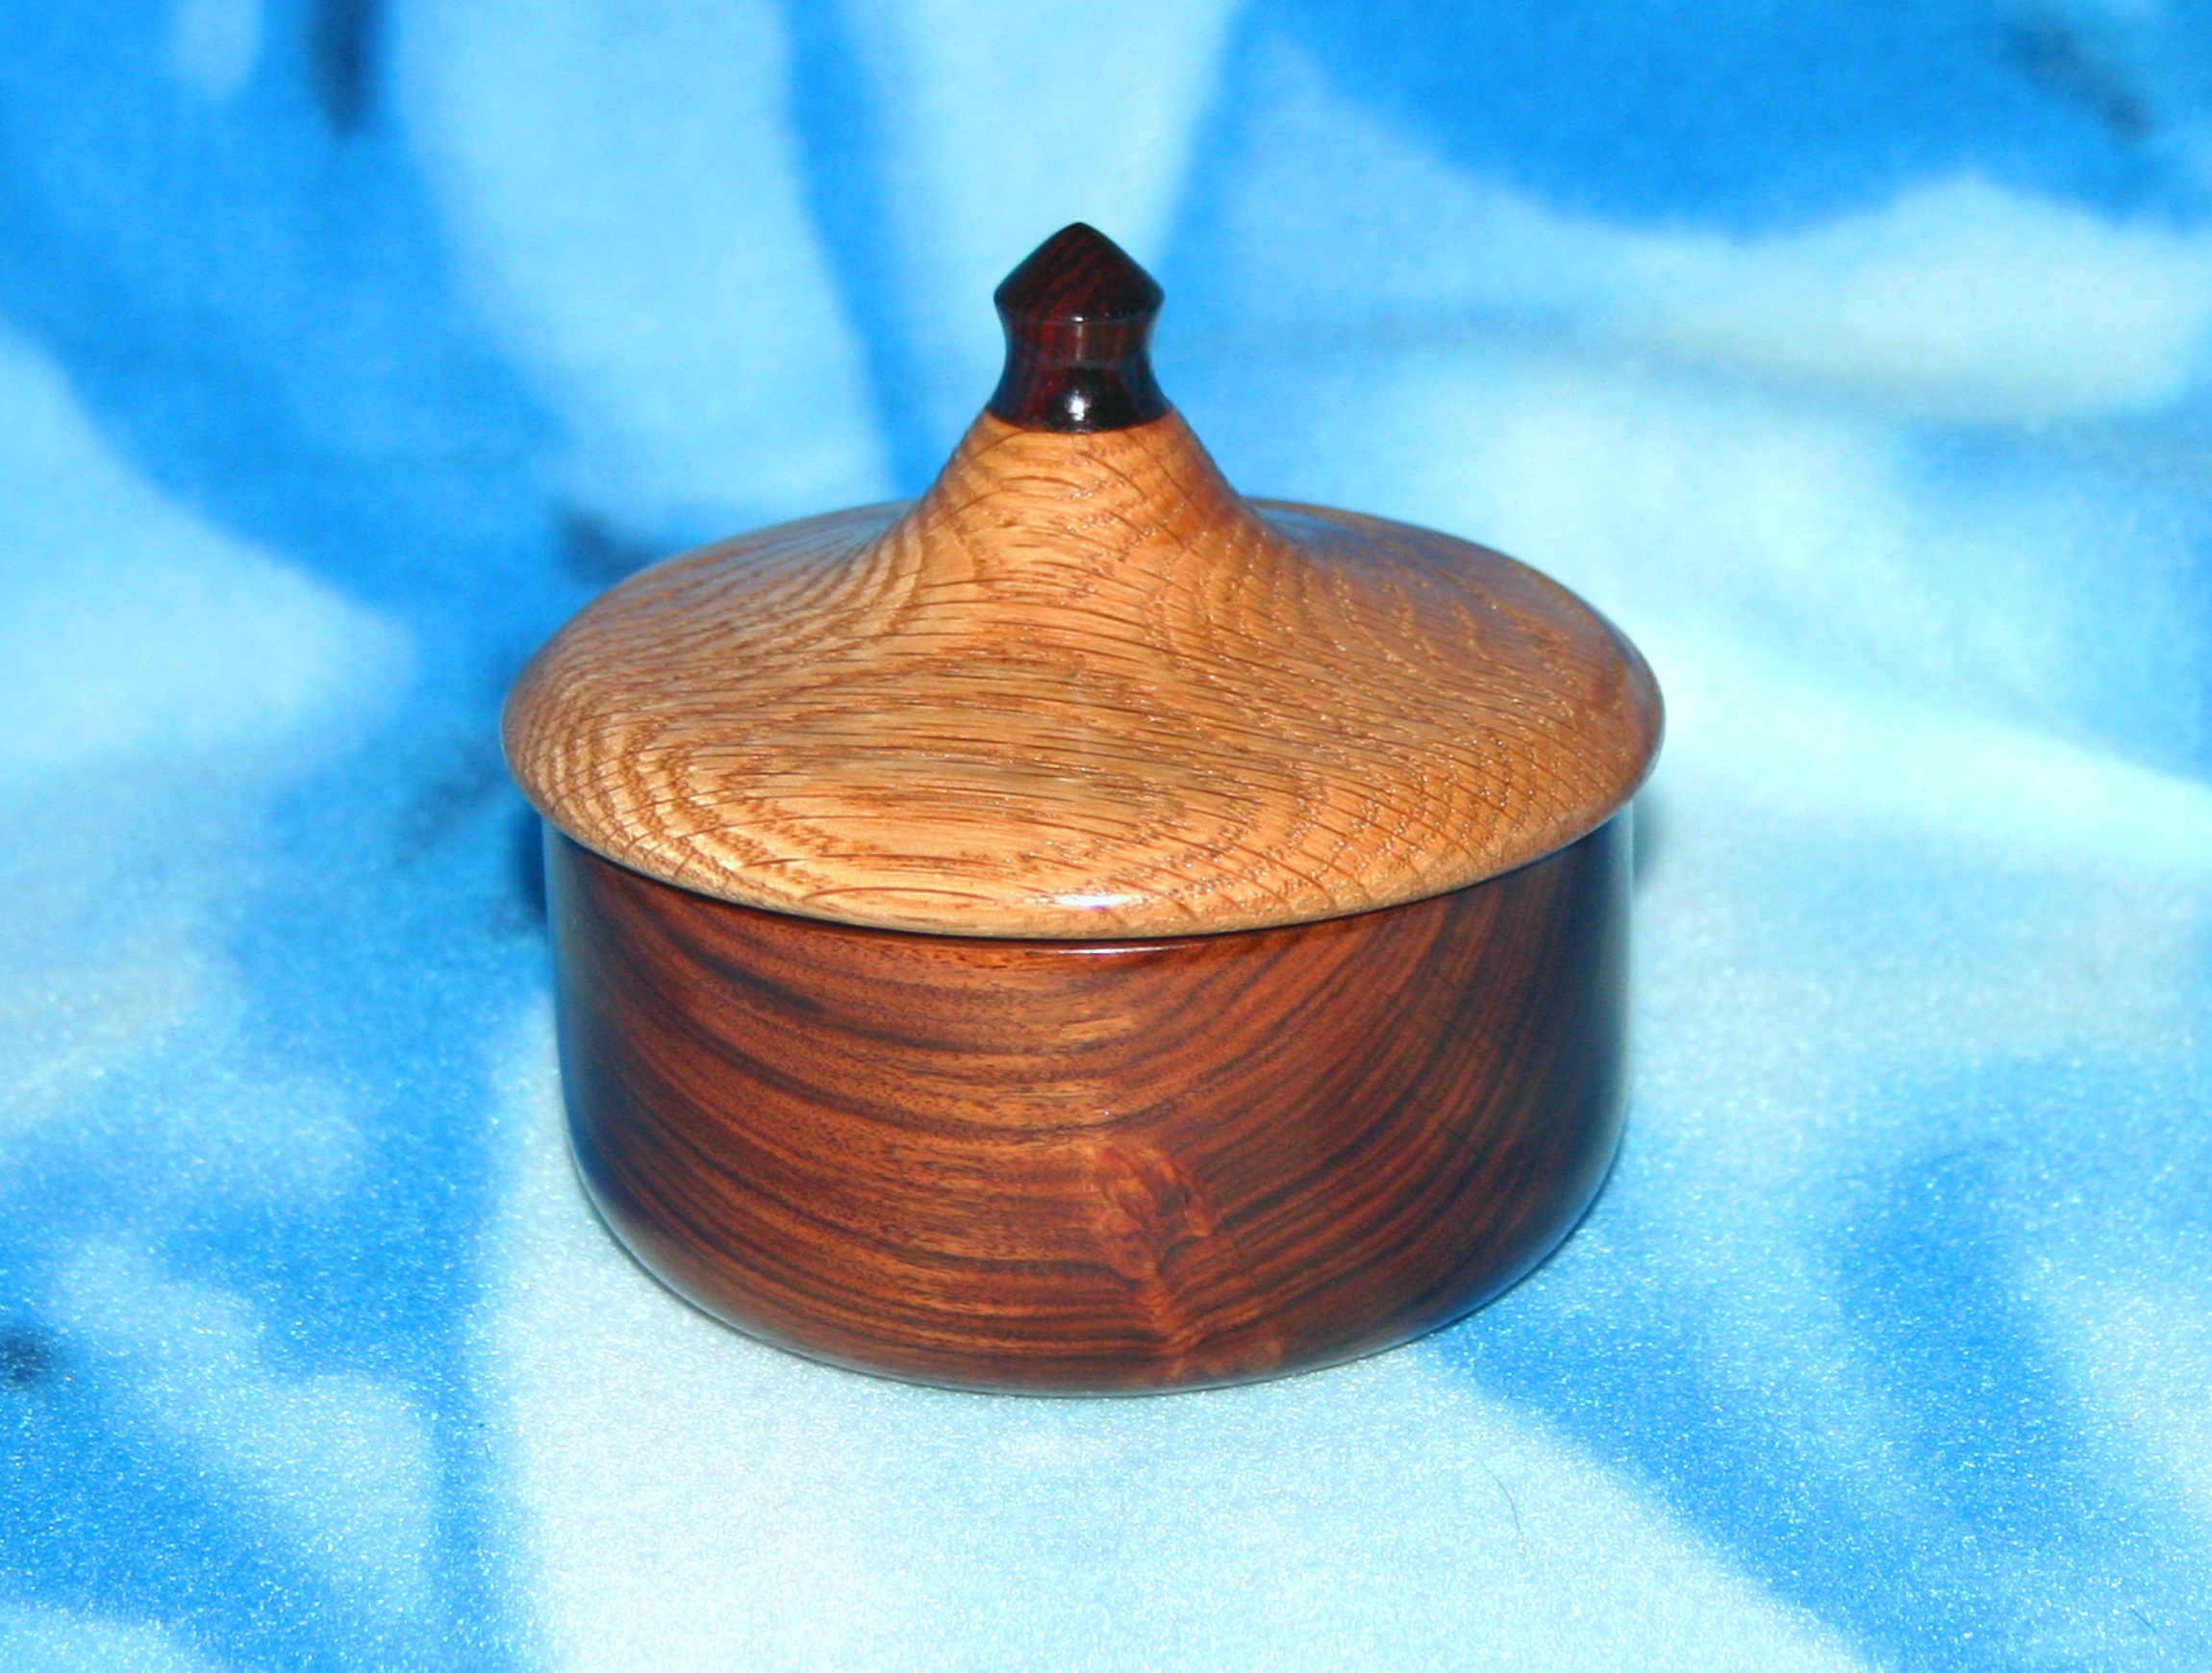 another lidded box